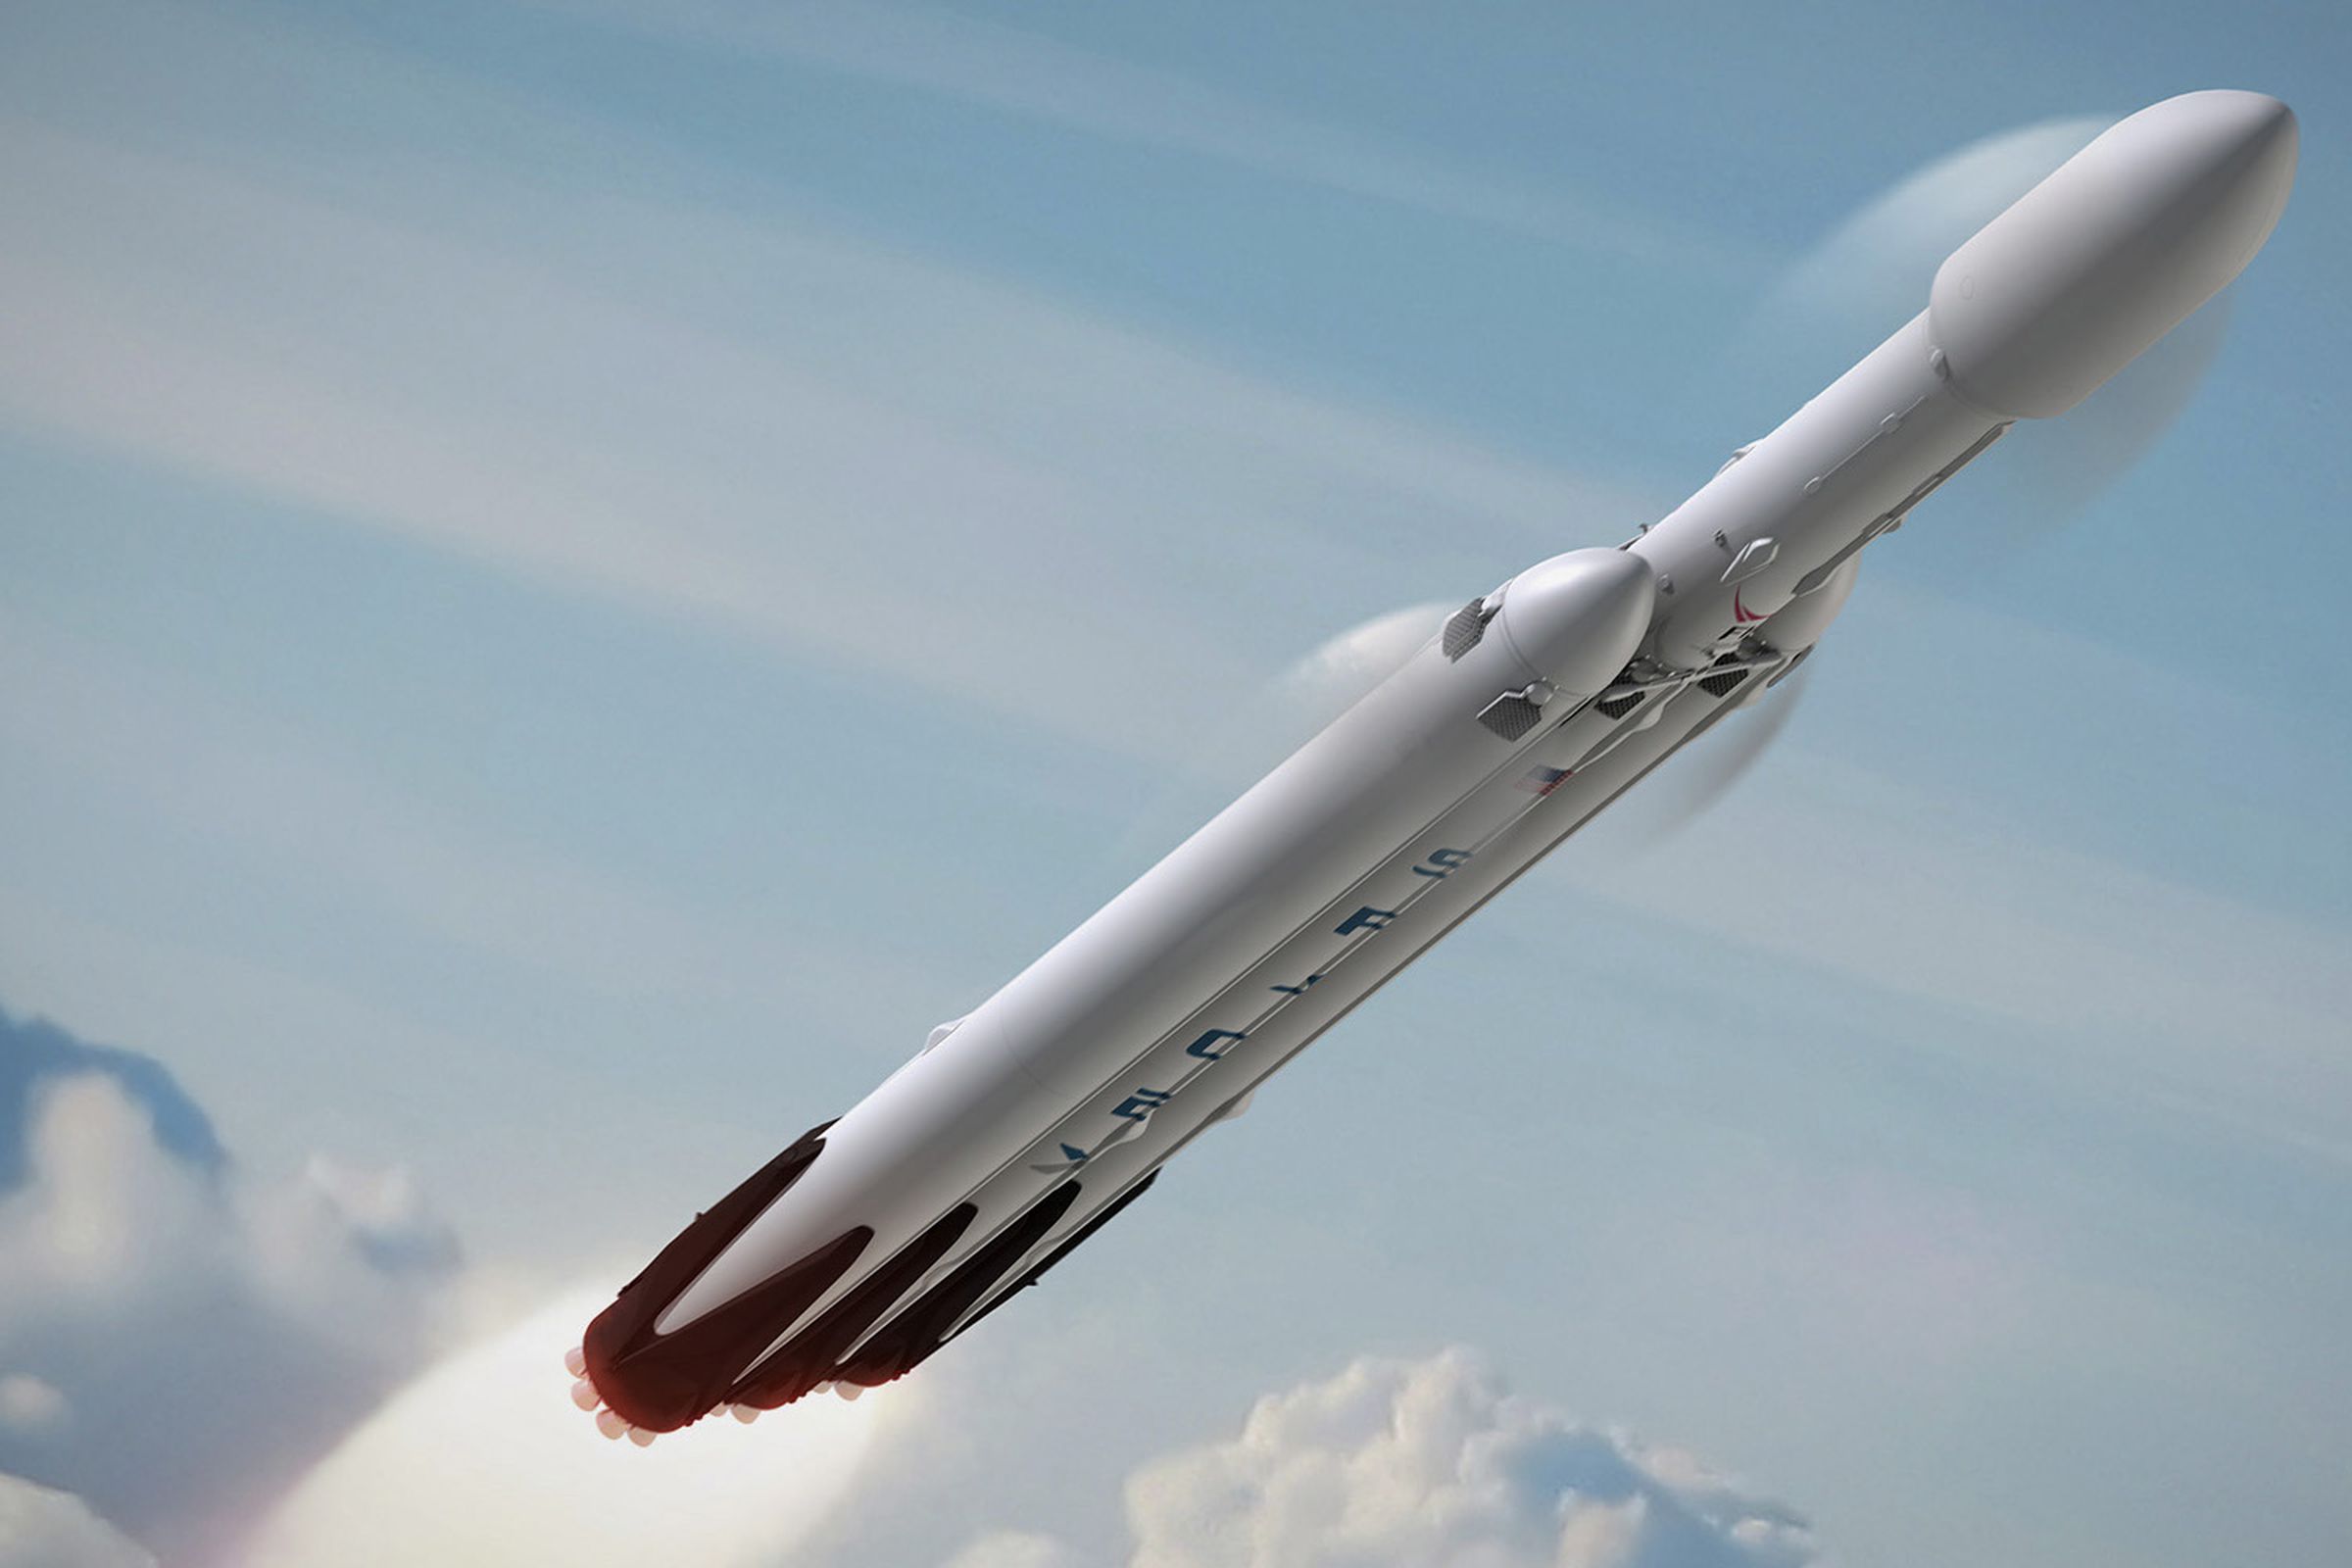 An artistic rendering of the Falcon Heavy